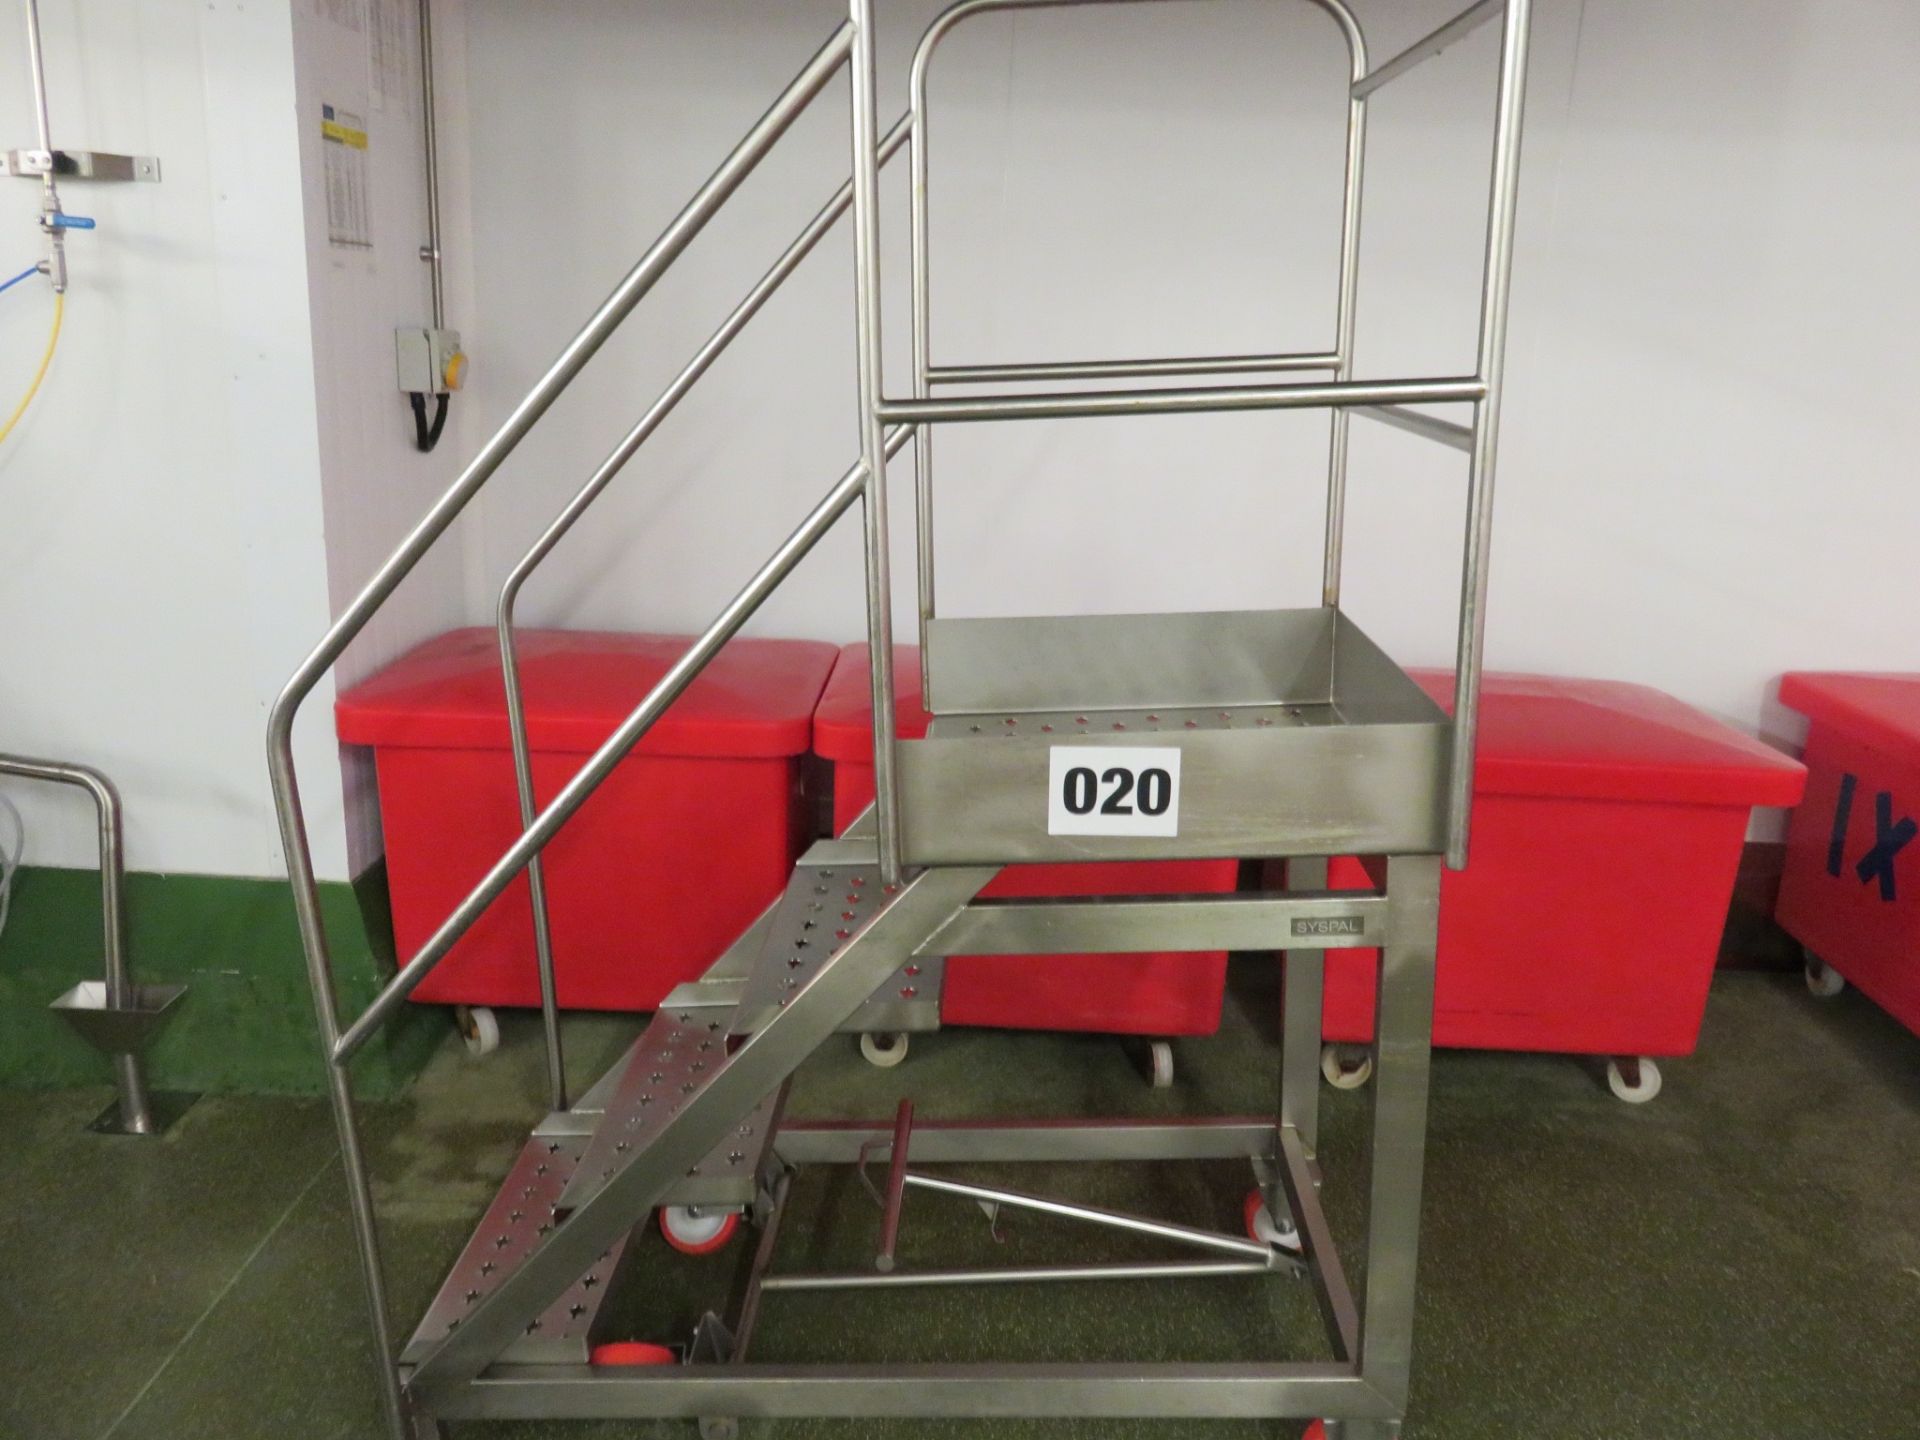 S/s Personnel Steps. Mobile. Approx. 900mm to platform, platform 600 x 600mm. Lift out £20